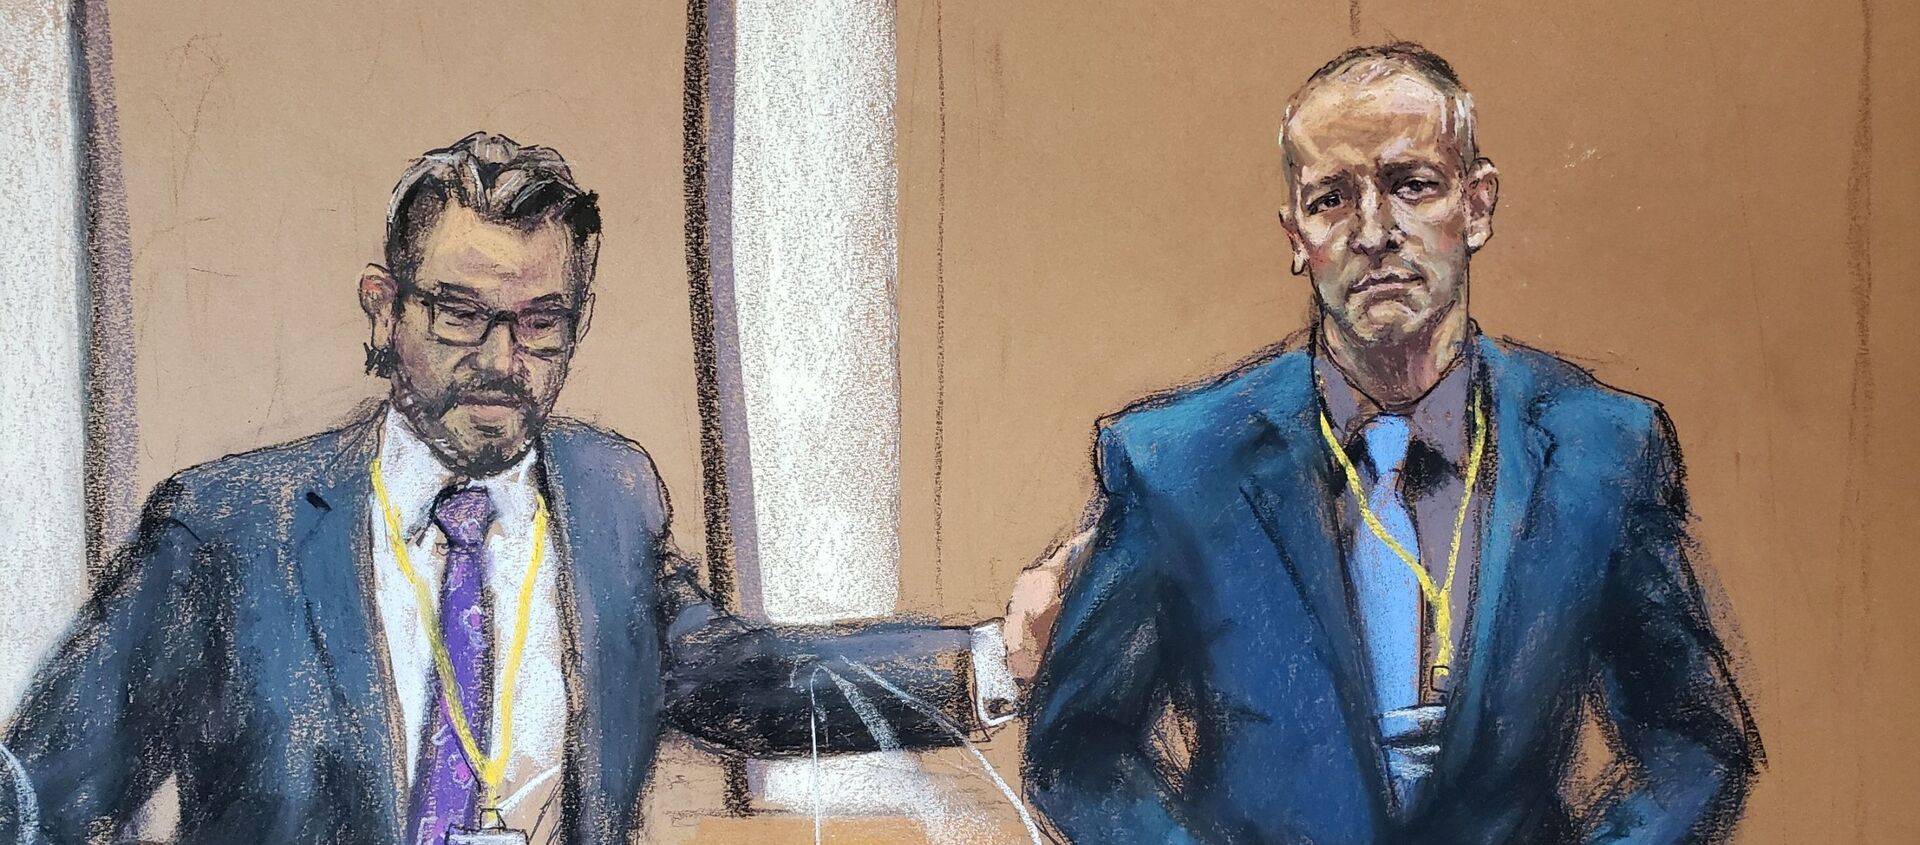 Defence attorney Eric Nelson introduces Derek Chauvin, the former Minneapolis police officer facing murder charges in the death of George Floyd, to potential jurors during jury selection in his trial in Minneapolis, Minnesota, U.S., March 15, 2021 in this courtroom sketch from a video feed of the proceedings. - Sputnik International, 1920